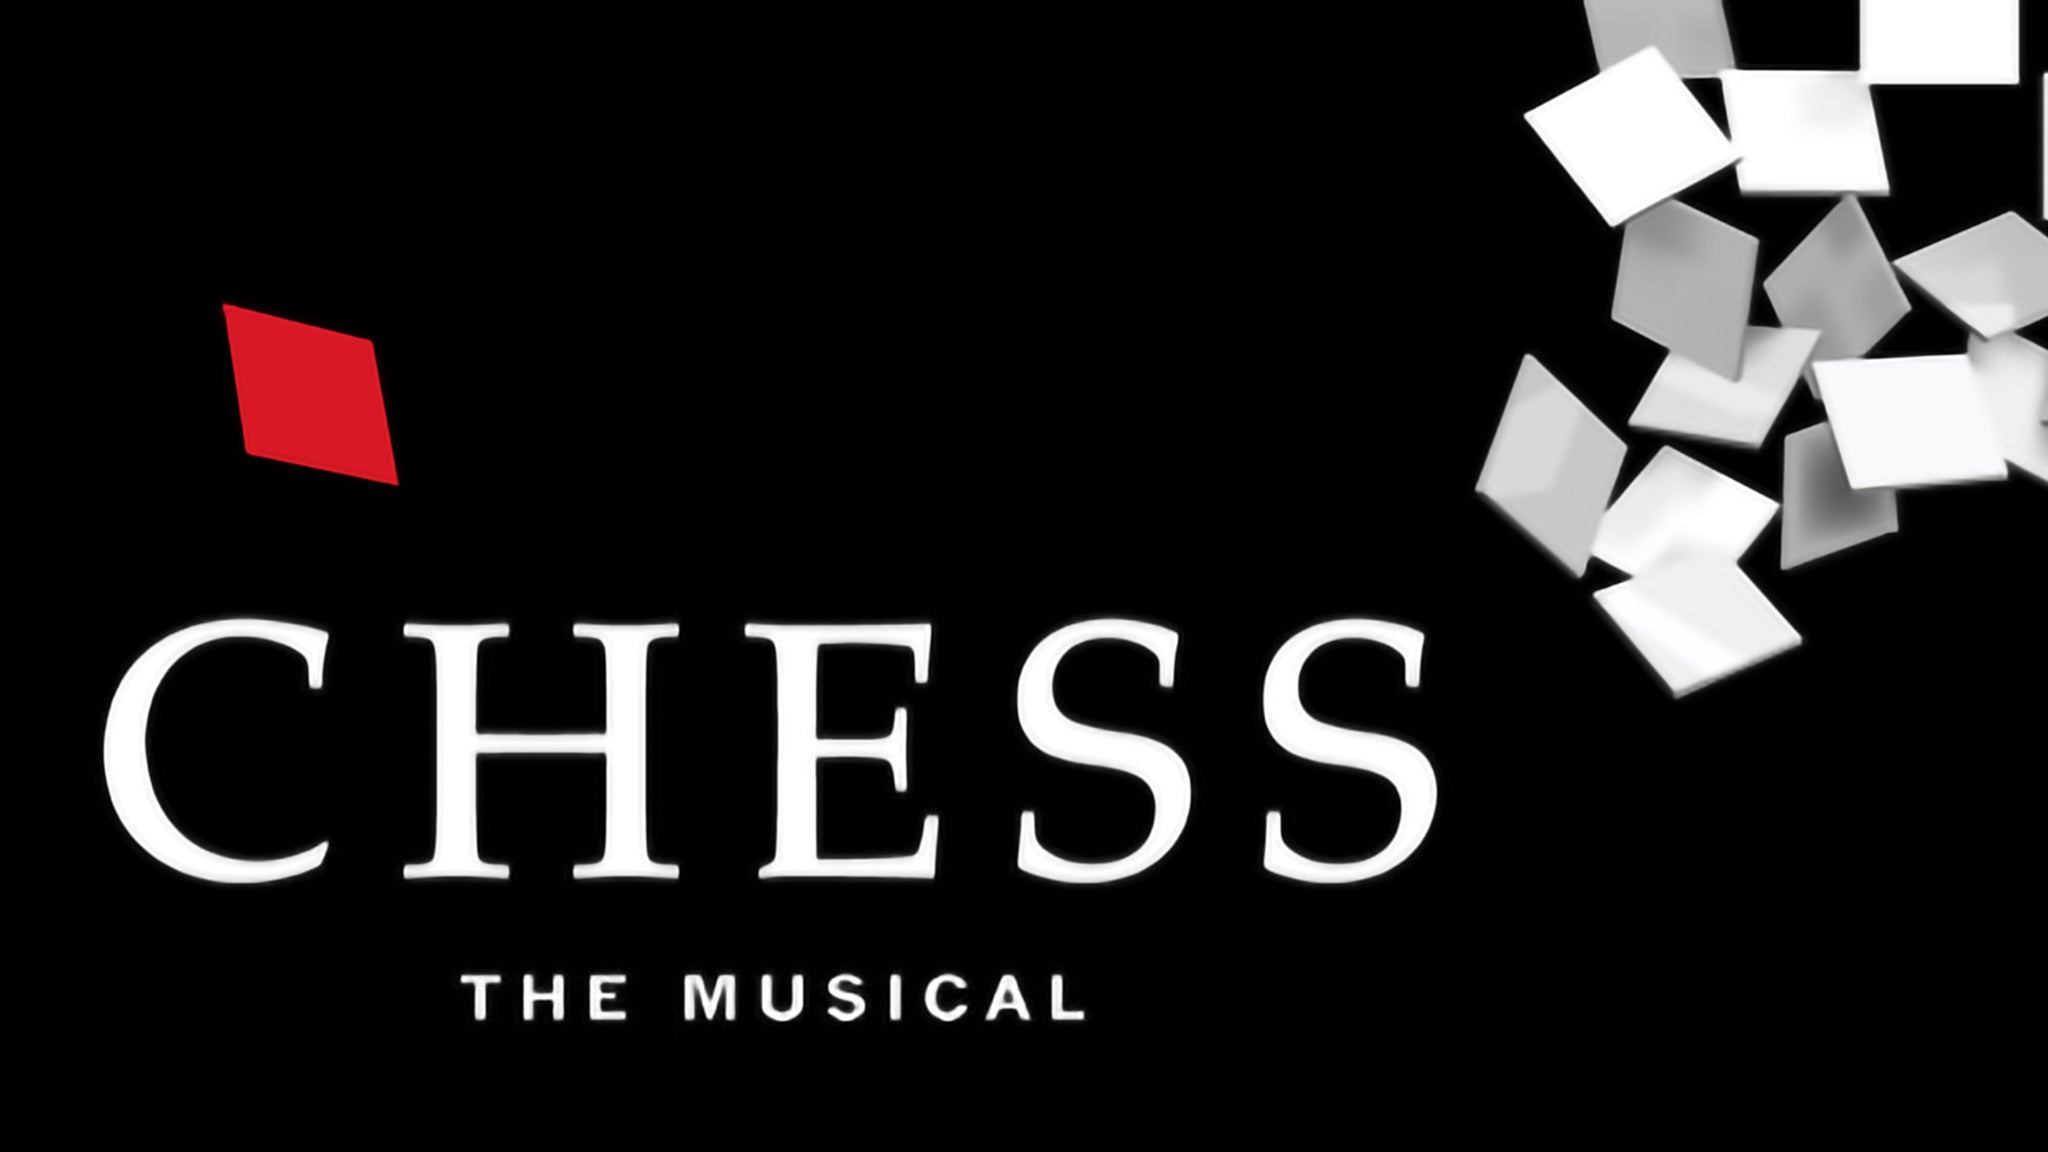 Image used with permission from Ticketmaster | Chess tickets